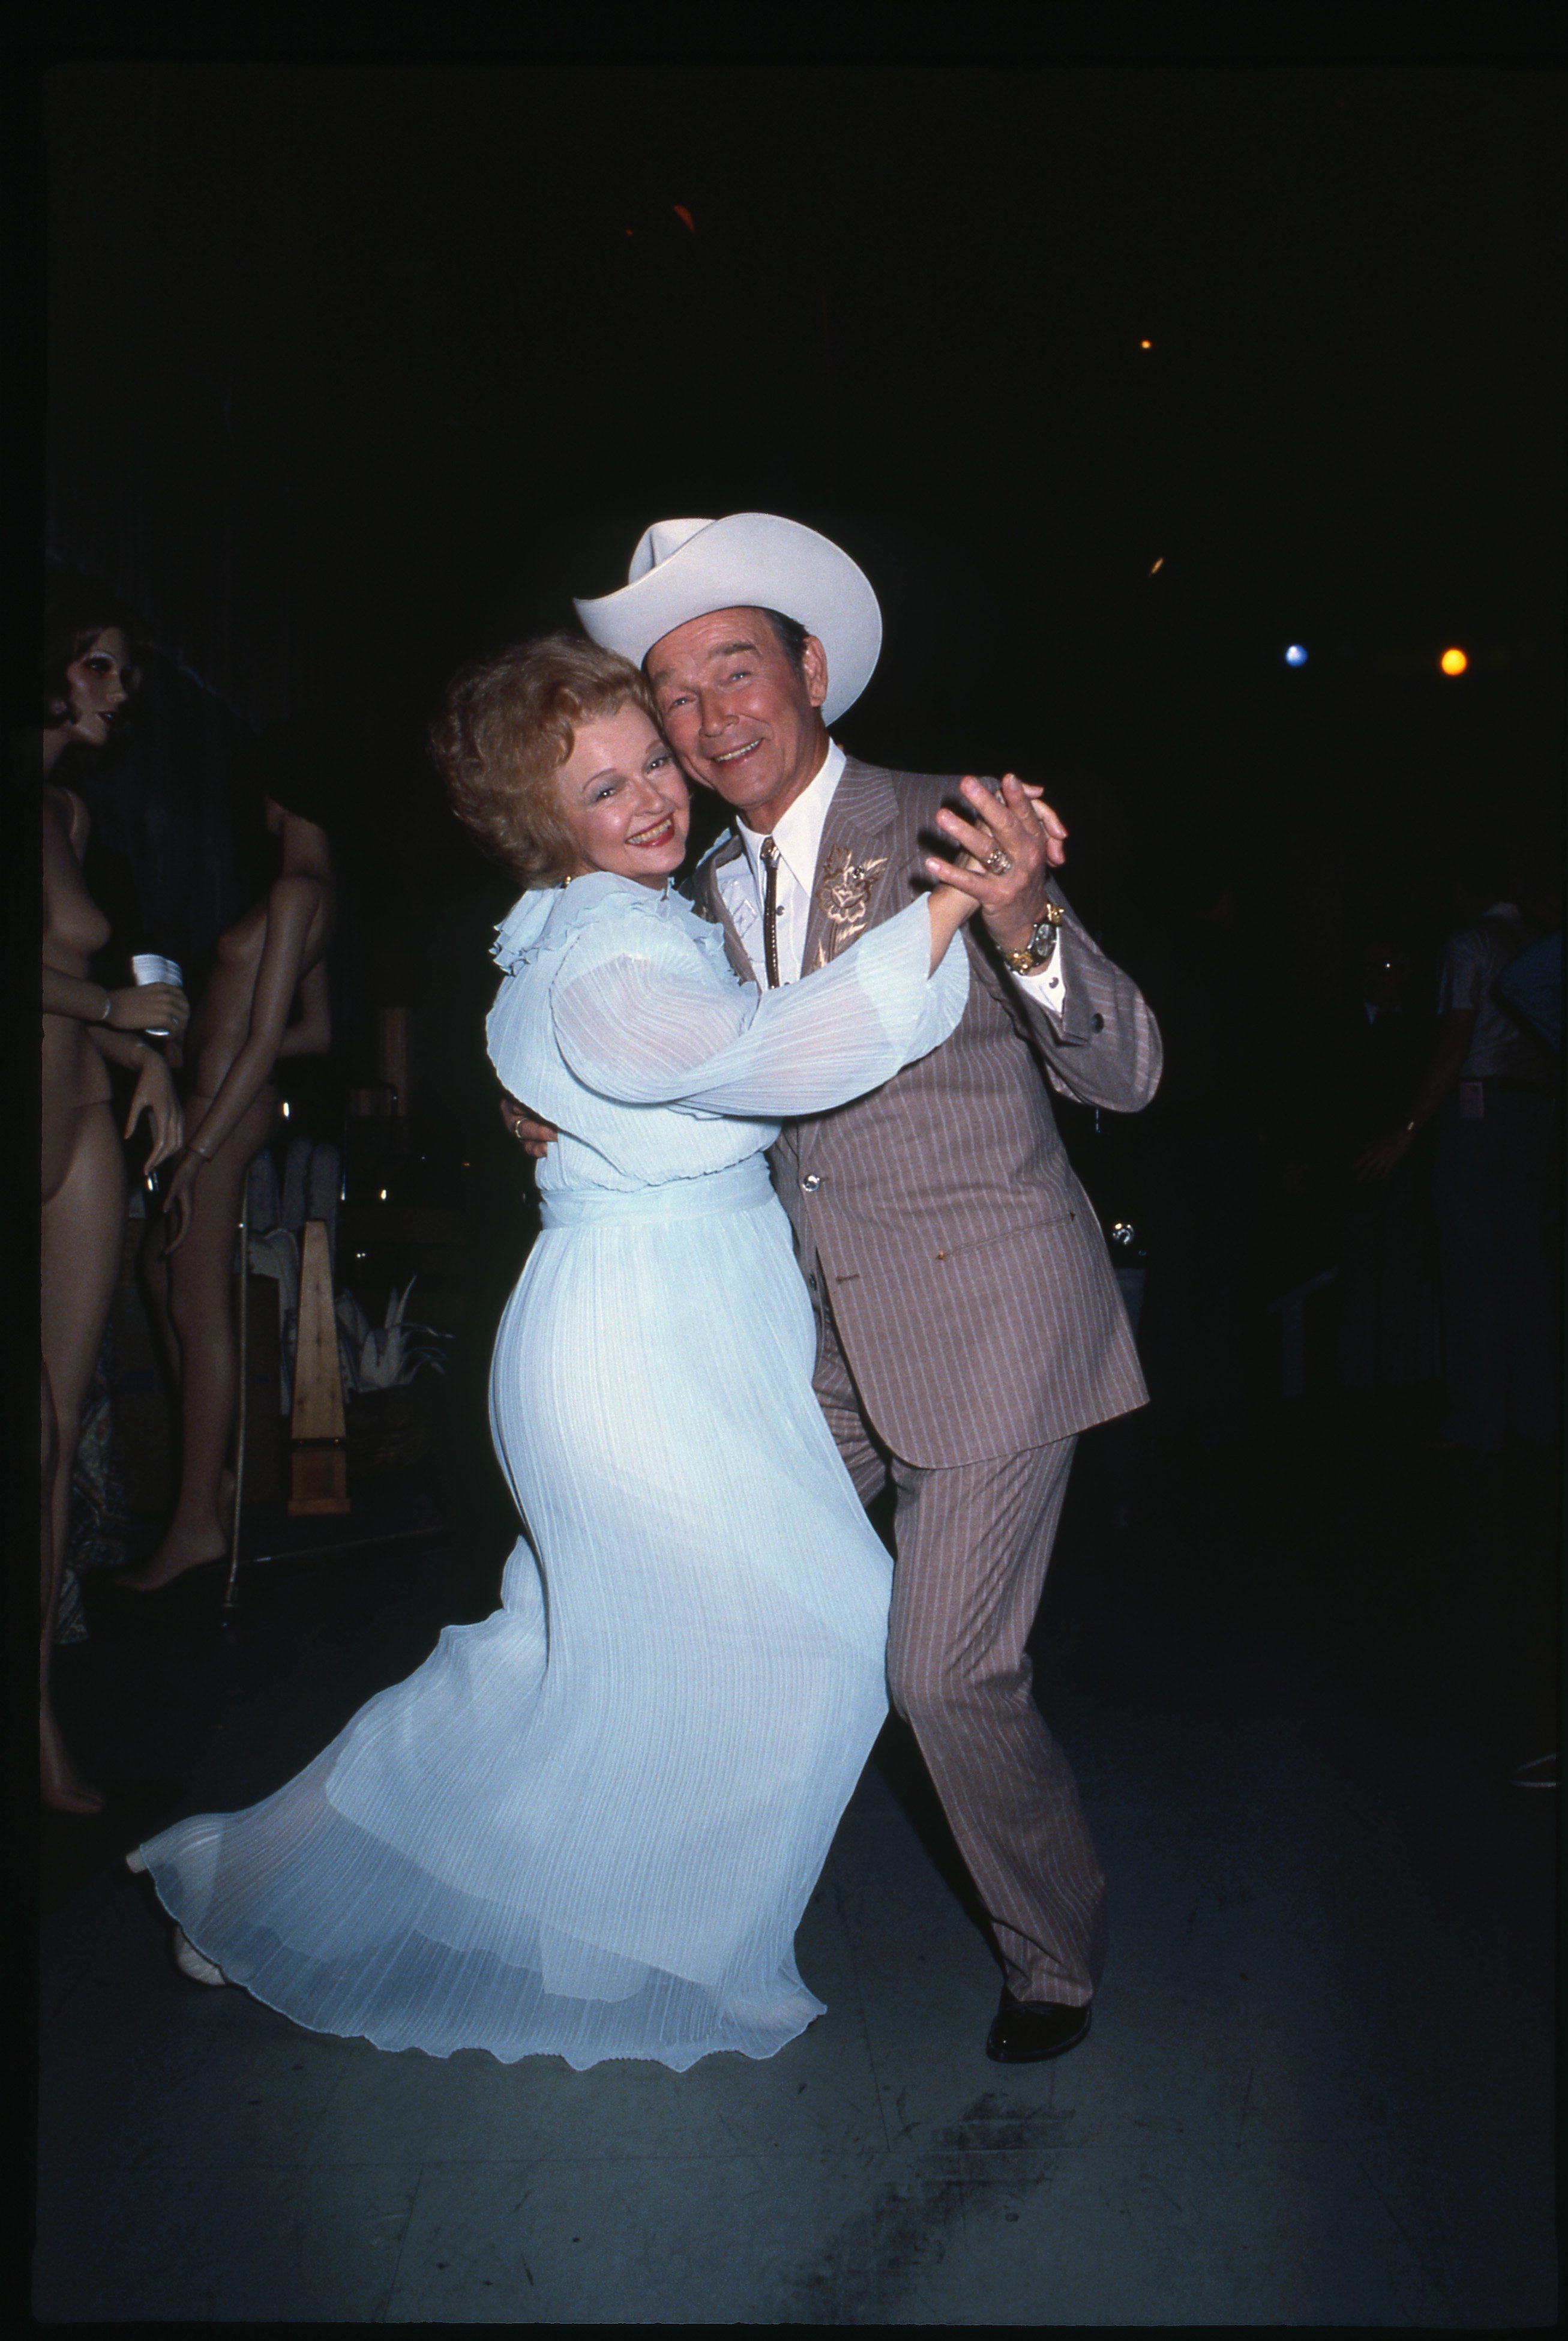 Dale Evans and her husband, Roy Rogers at the taping of the Barbara Mandrell show where they celebrated their 50th anniversary in show business on the show on February 21, 1981, in Los Angeles, California. | Source: Getty Images.